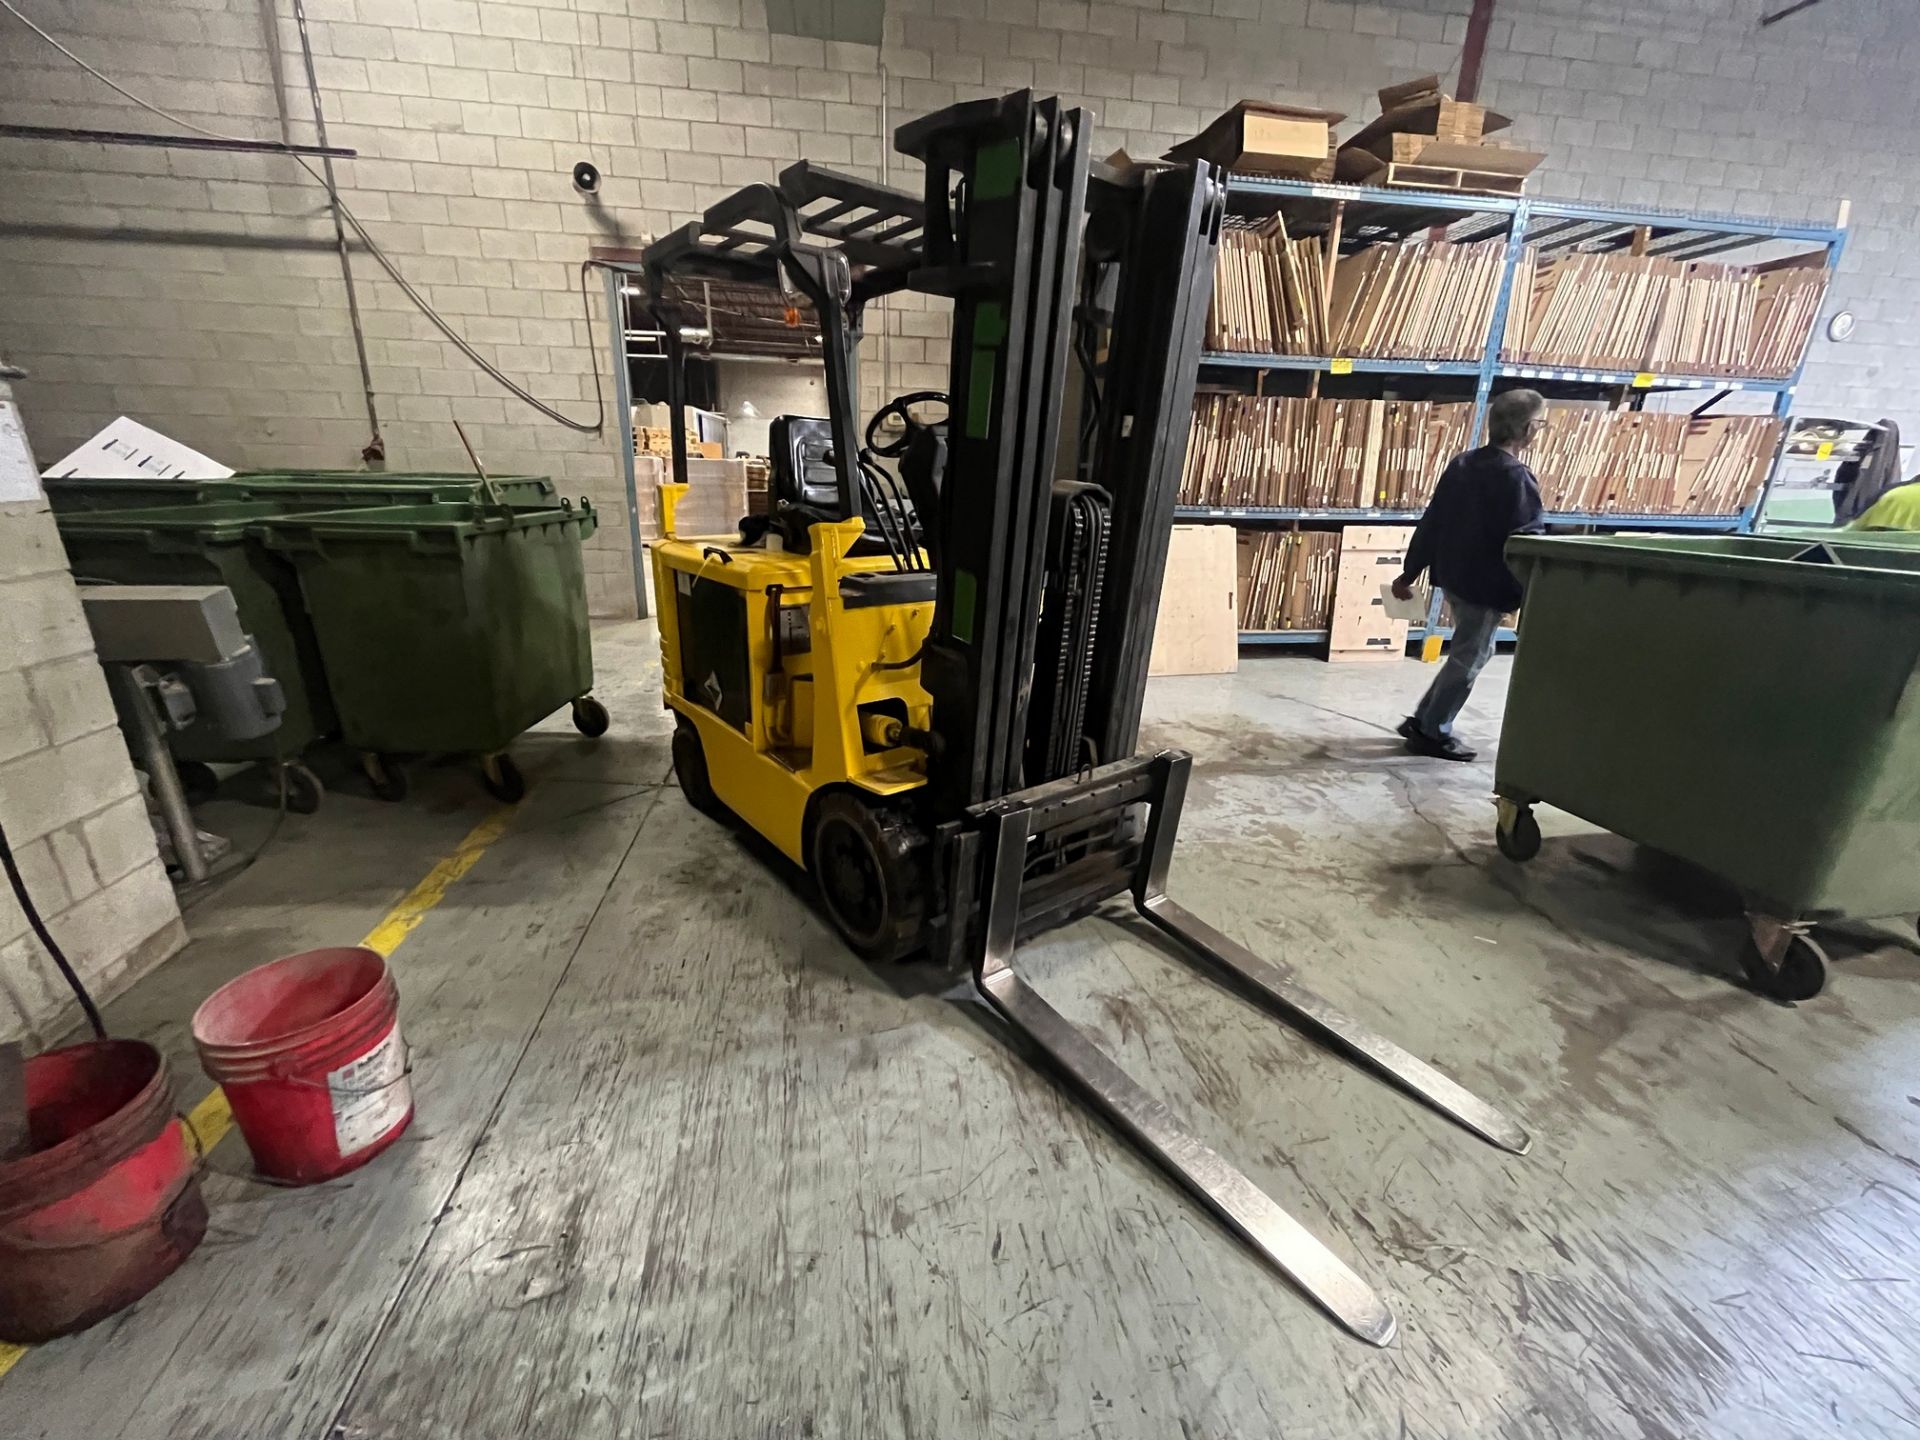 CATERPILLAR 2FC25 ELECTRIC FORKLIFT, 5,000LB CAP., 26V, 190" MAX LIFT, 3-STAGE MAST, CHARGER AND